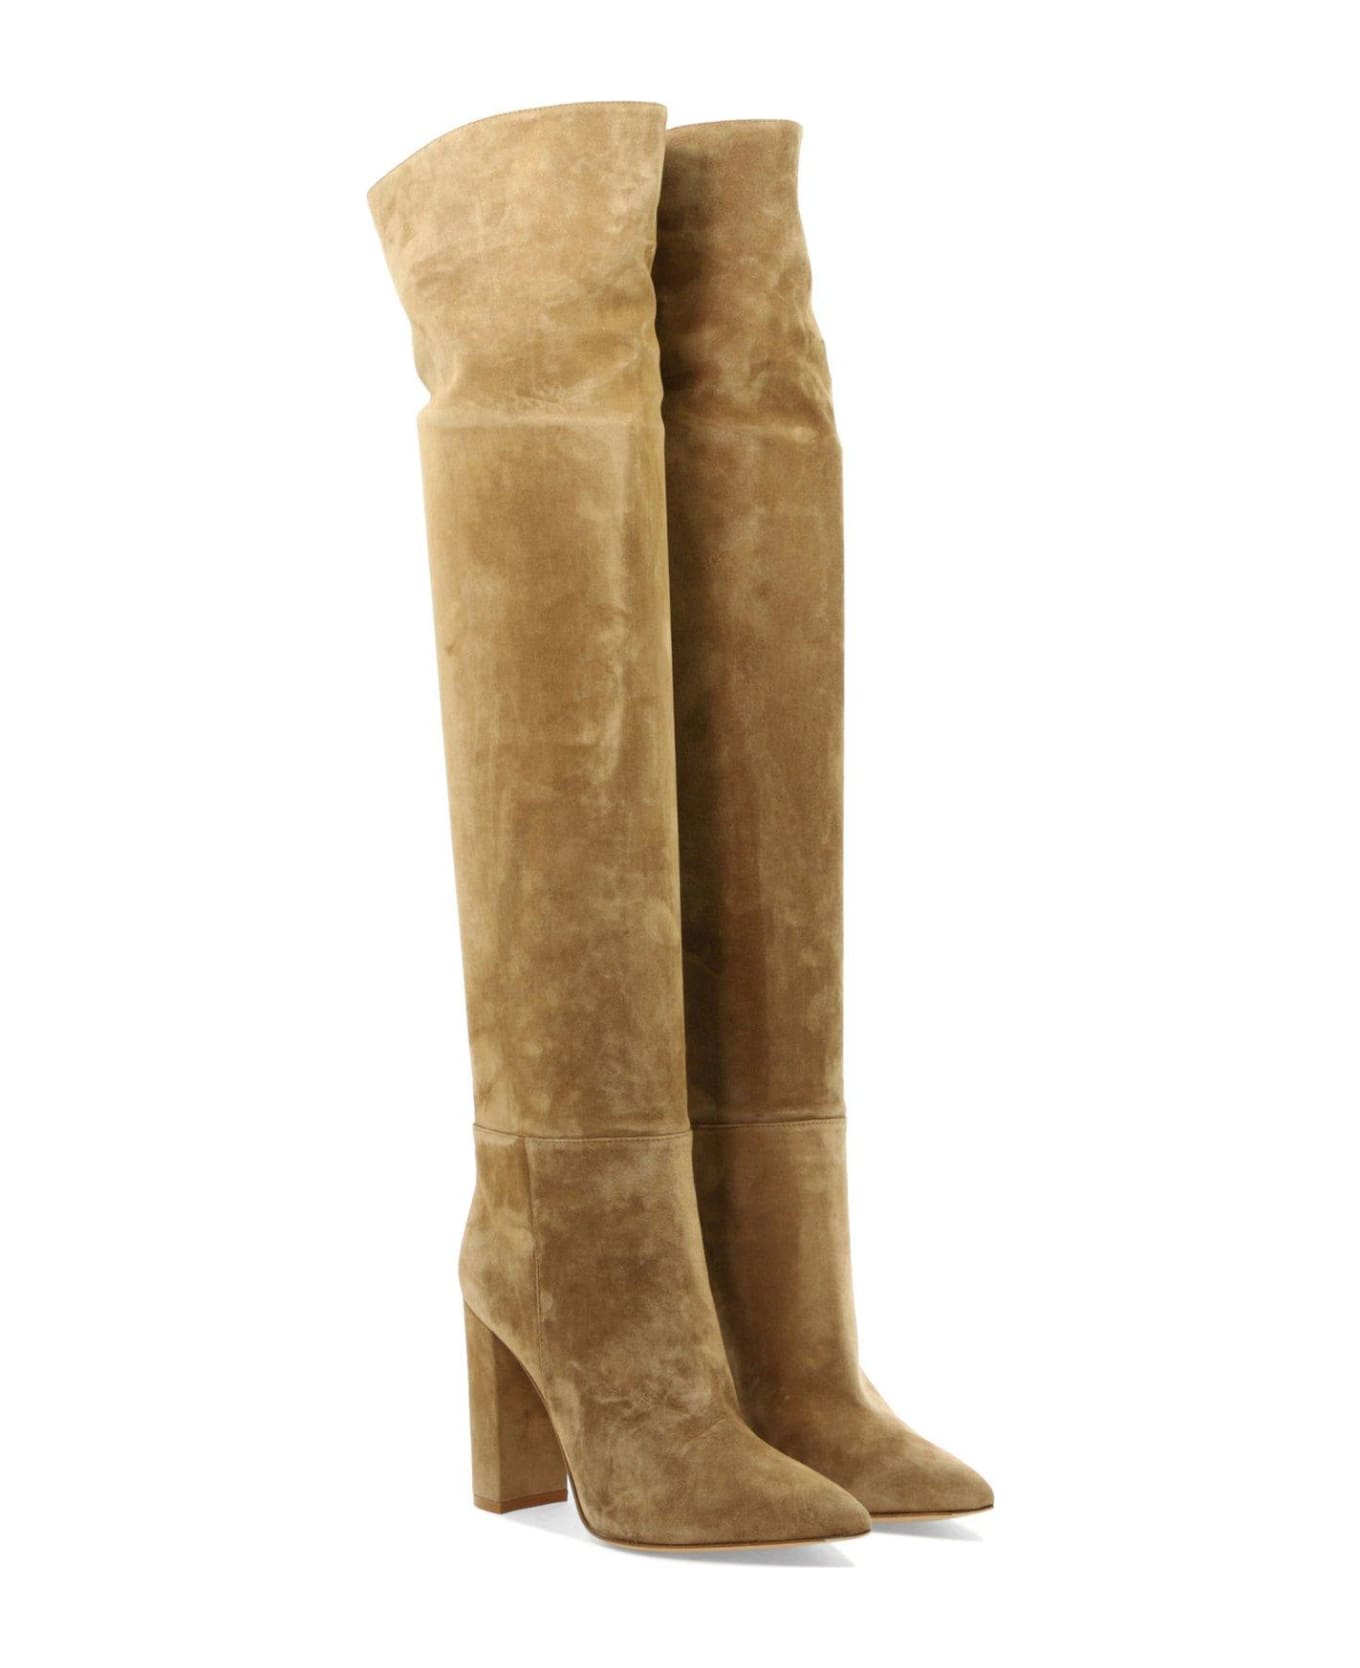 Gianvito Rossi Pointed-toe Heeled Boots - CAMEL